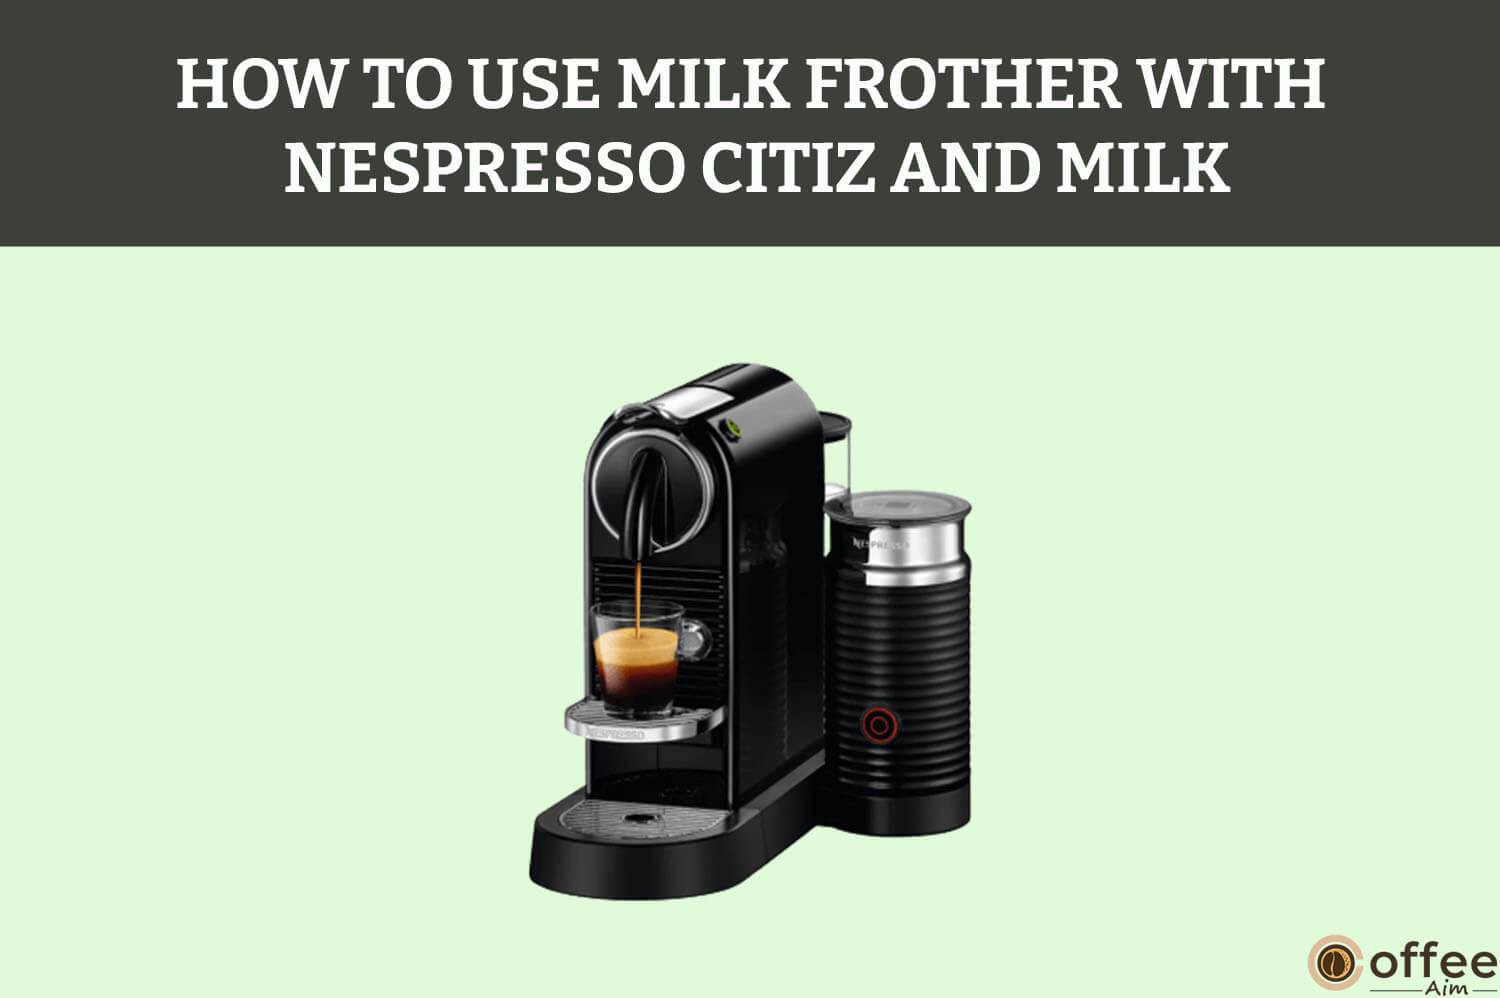 Featured image for the article "How To Use Milk Frother With Nespresso Citiz And Milk"